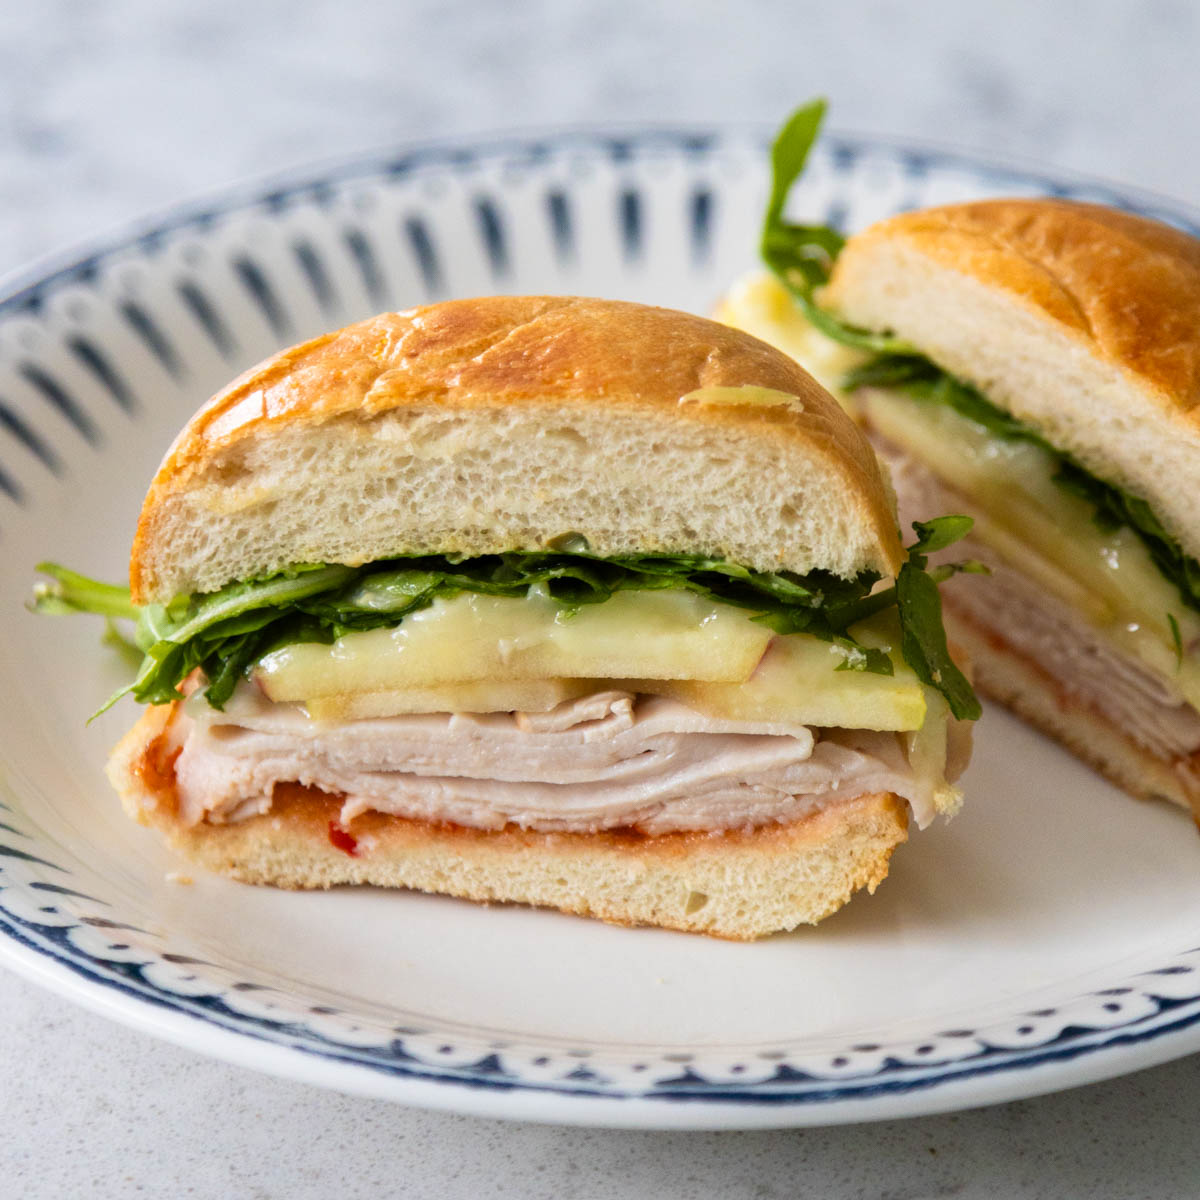 The baked turkey brie sandwich has been sliced in half so you can see the layers of turkey, apple, brie, and arugula.